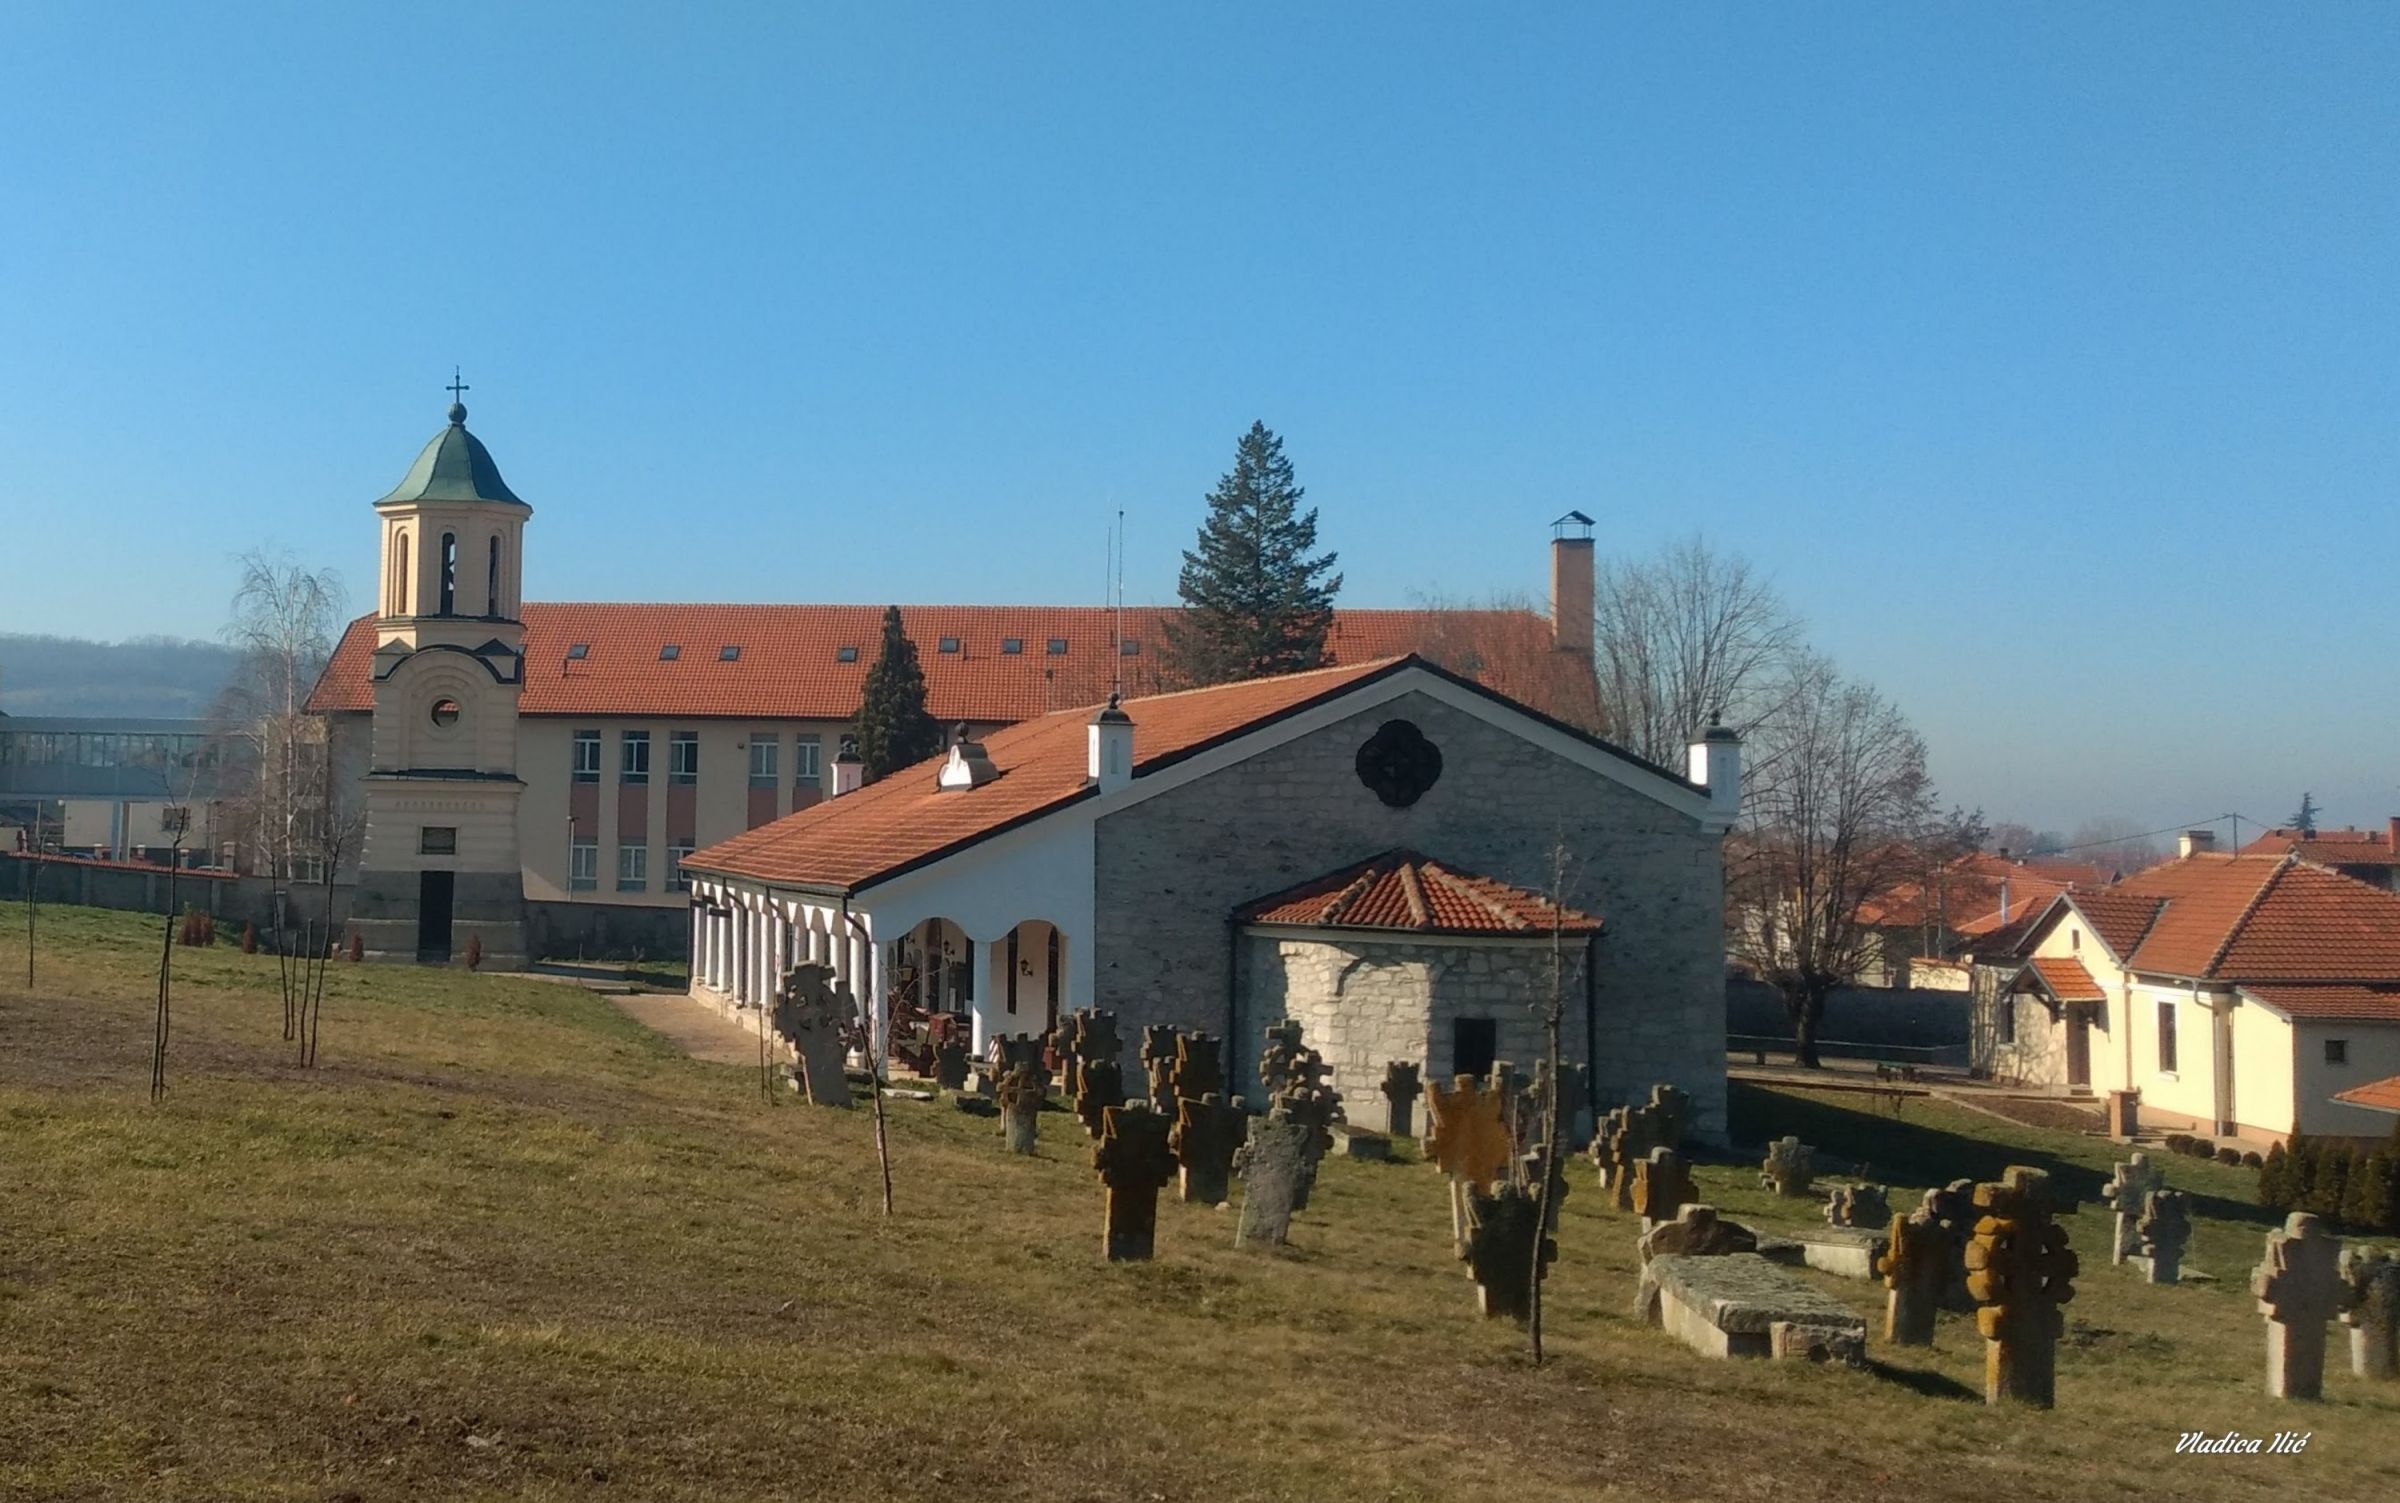 The old cemetery in the church complex